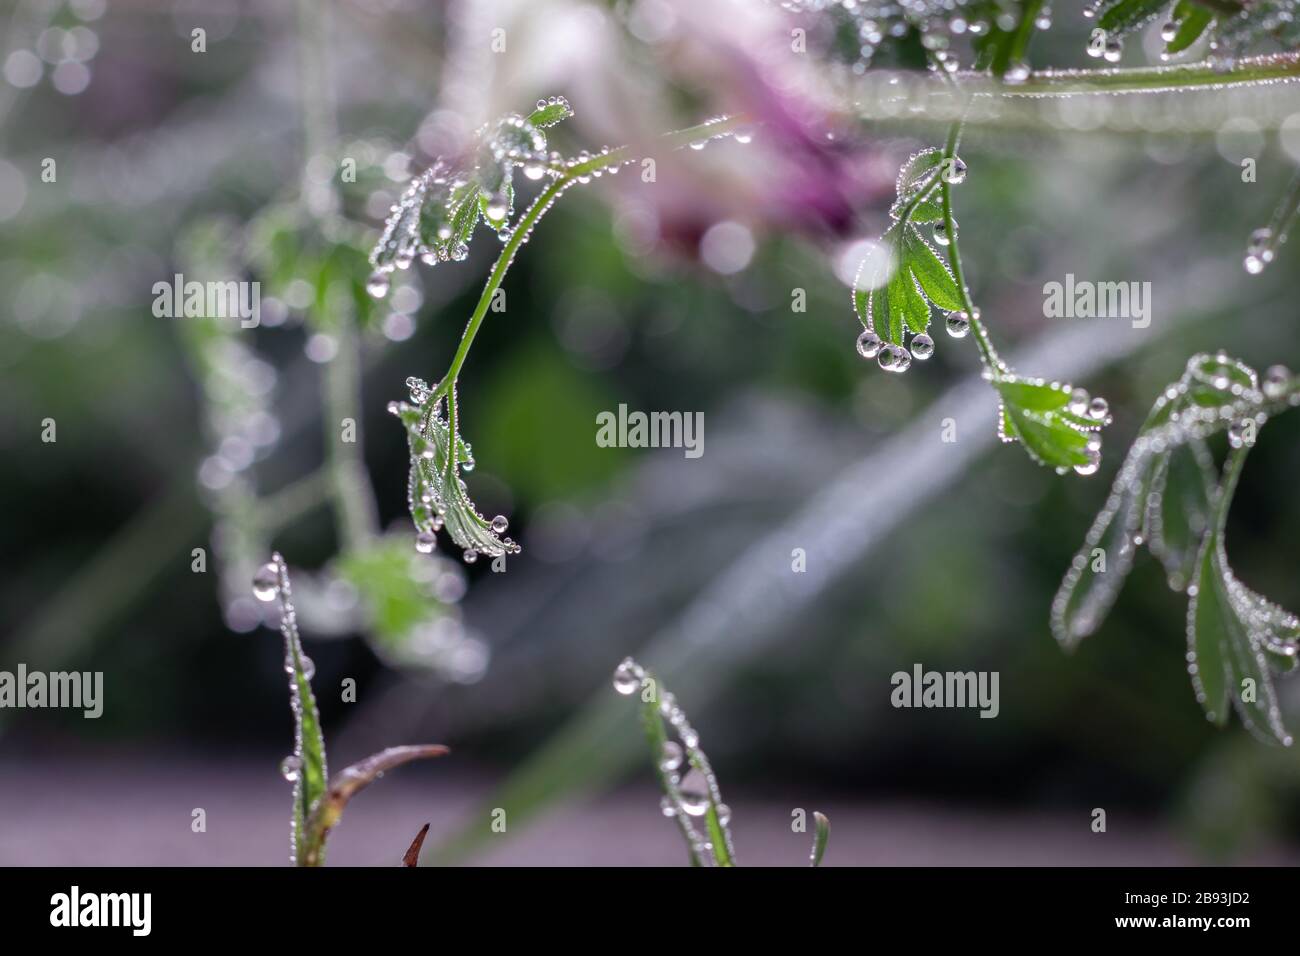 Fumaria capreolata, the white ramping fumitory, close-up on dew drops on leaves, blurred background. Stock Photo